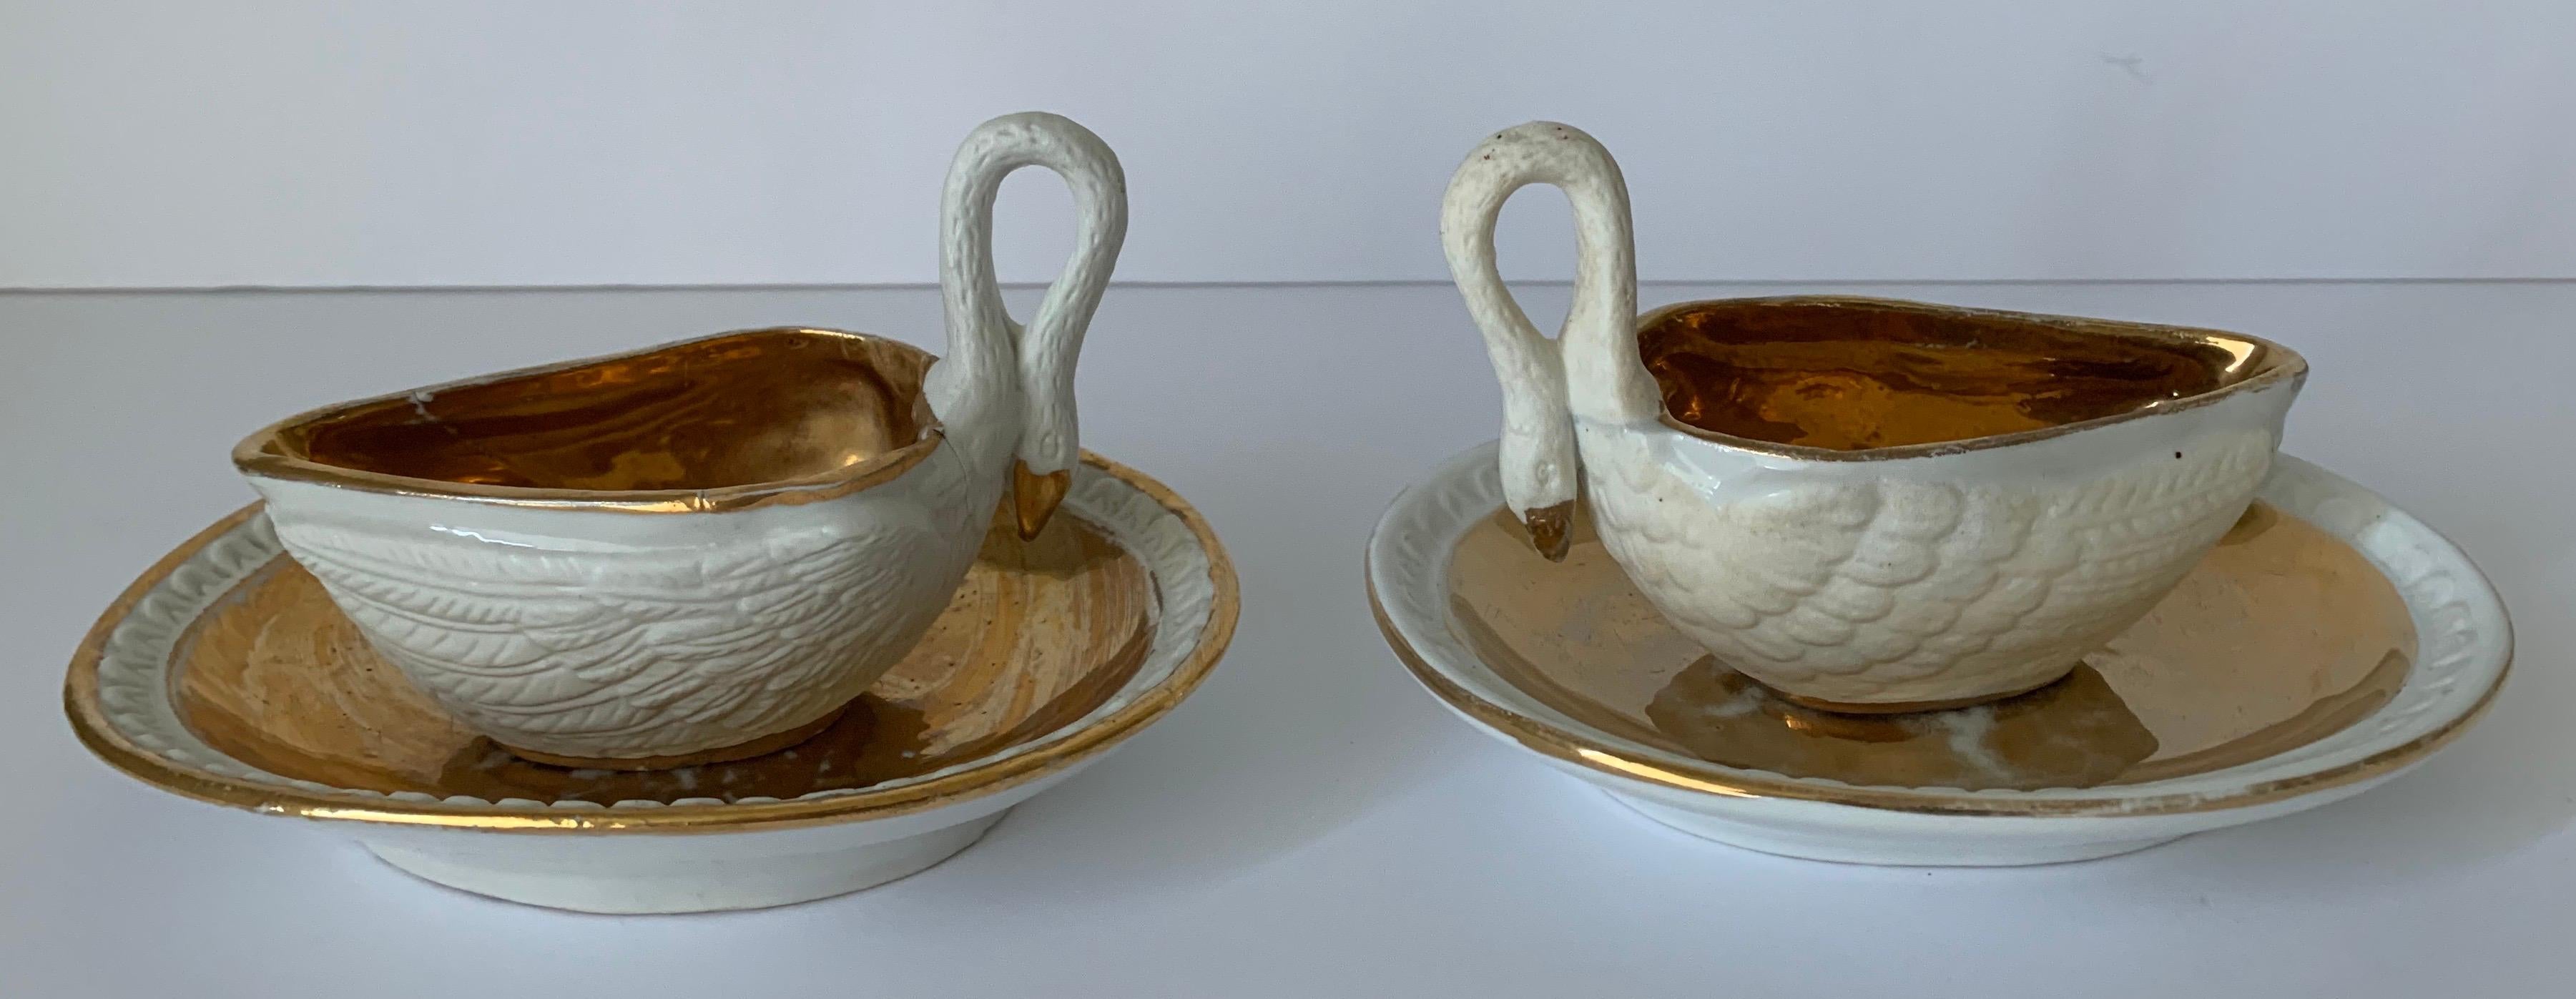 Pair of early 19th century bisque porcelain gilt swan dishes by Sèvres. Each swan and dish varies slightly.